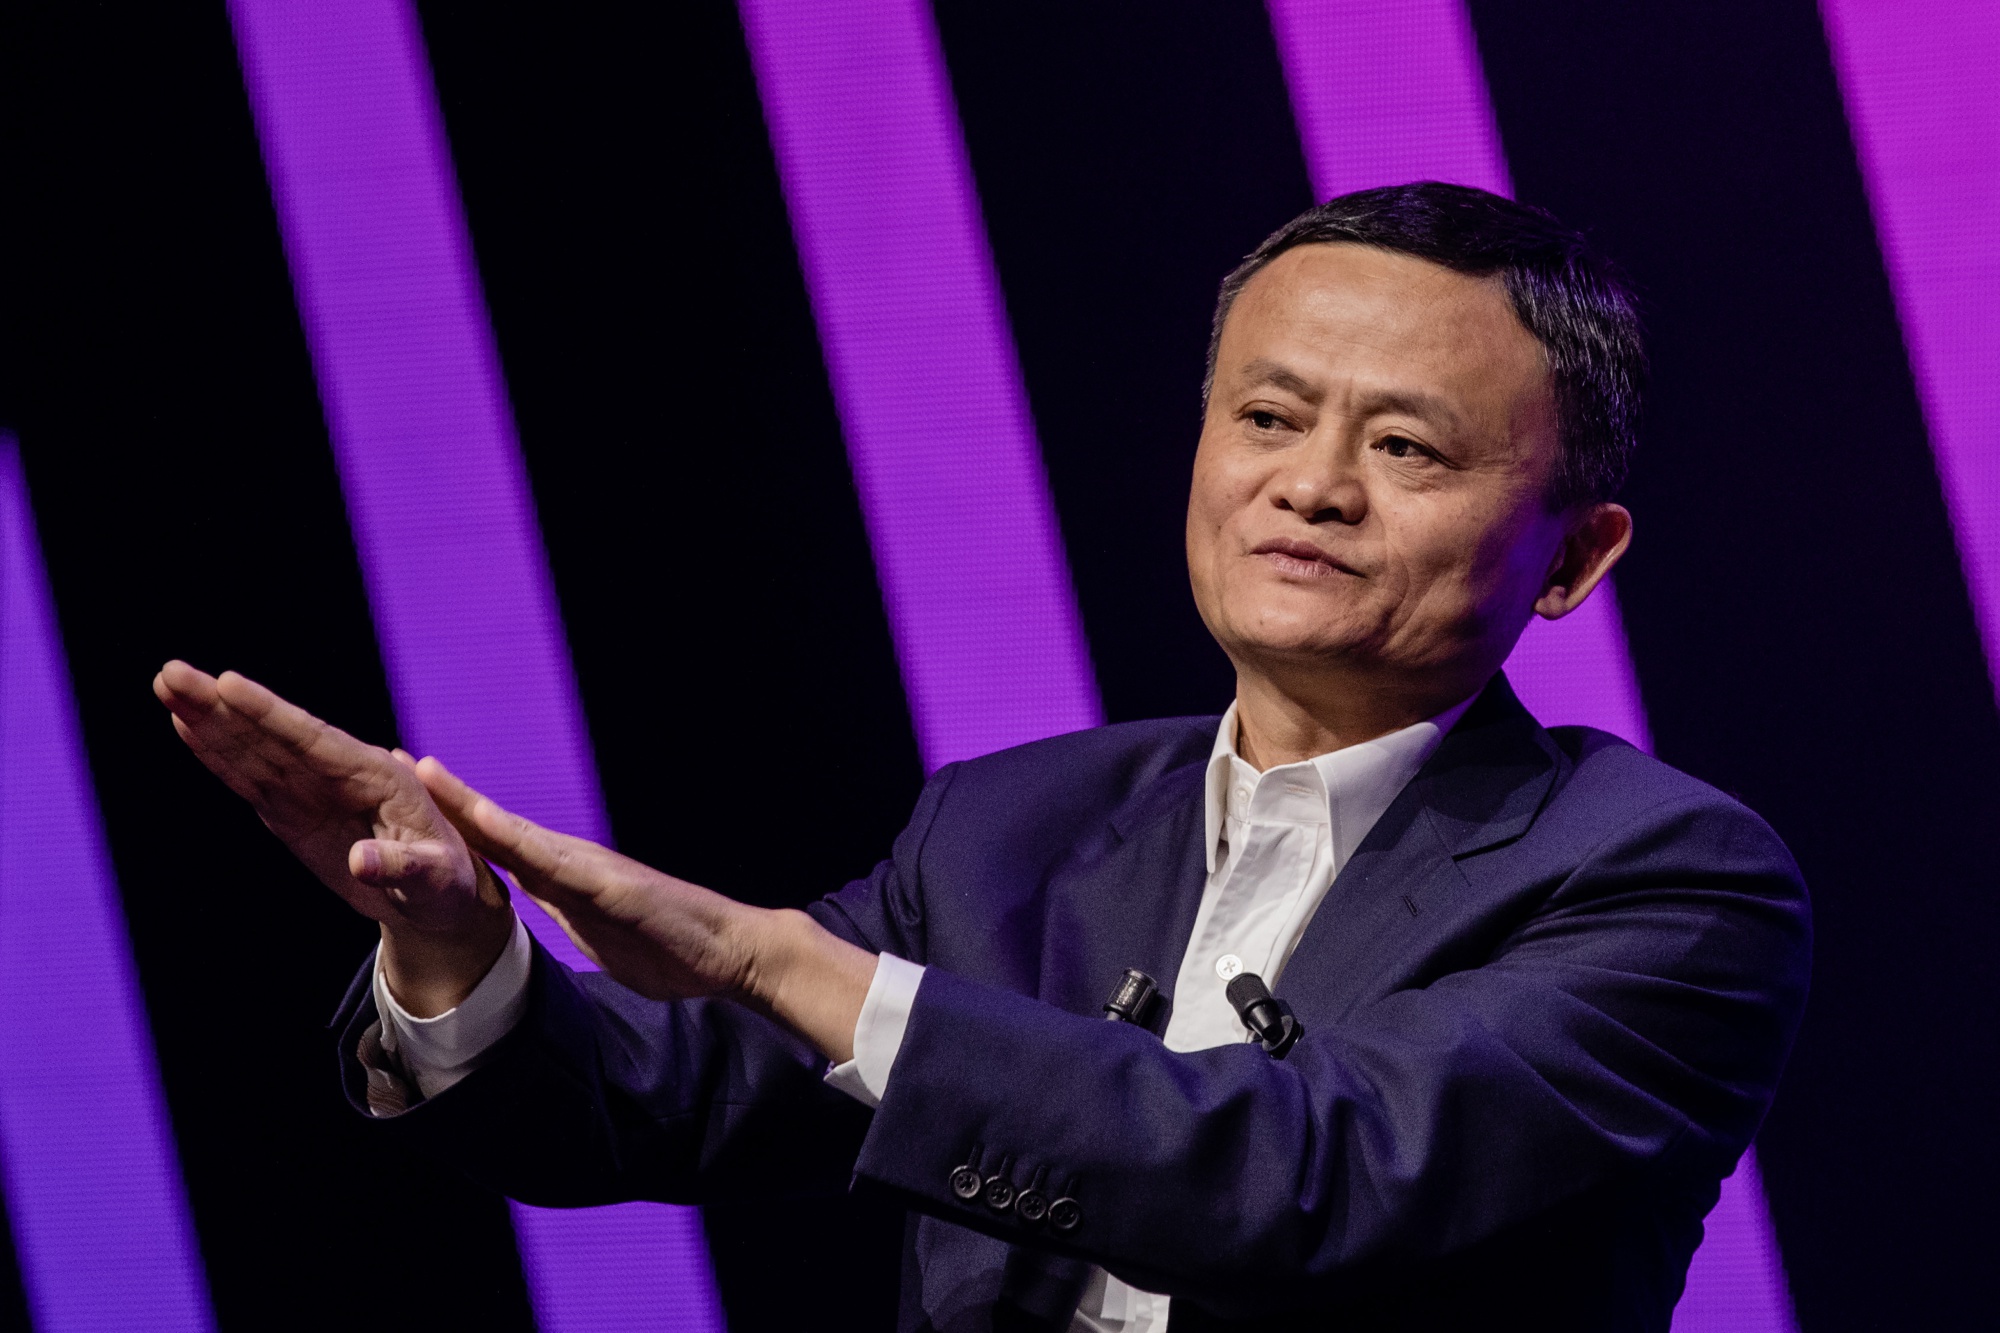 Jack Ma embraces blockchain for Ant but warns of bitcoin bubble - BNN Bloomberg